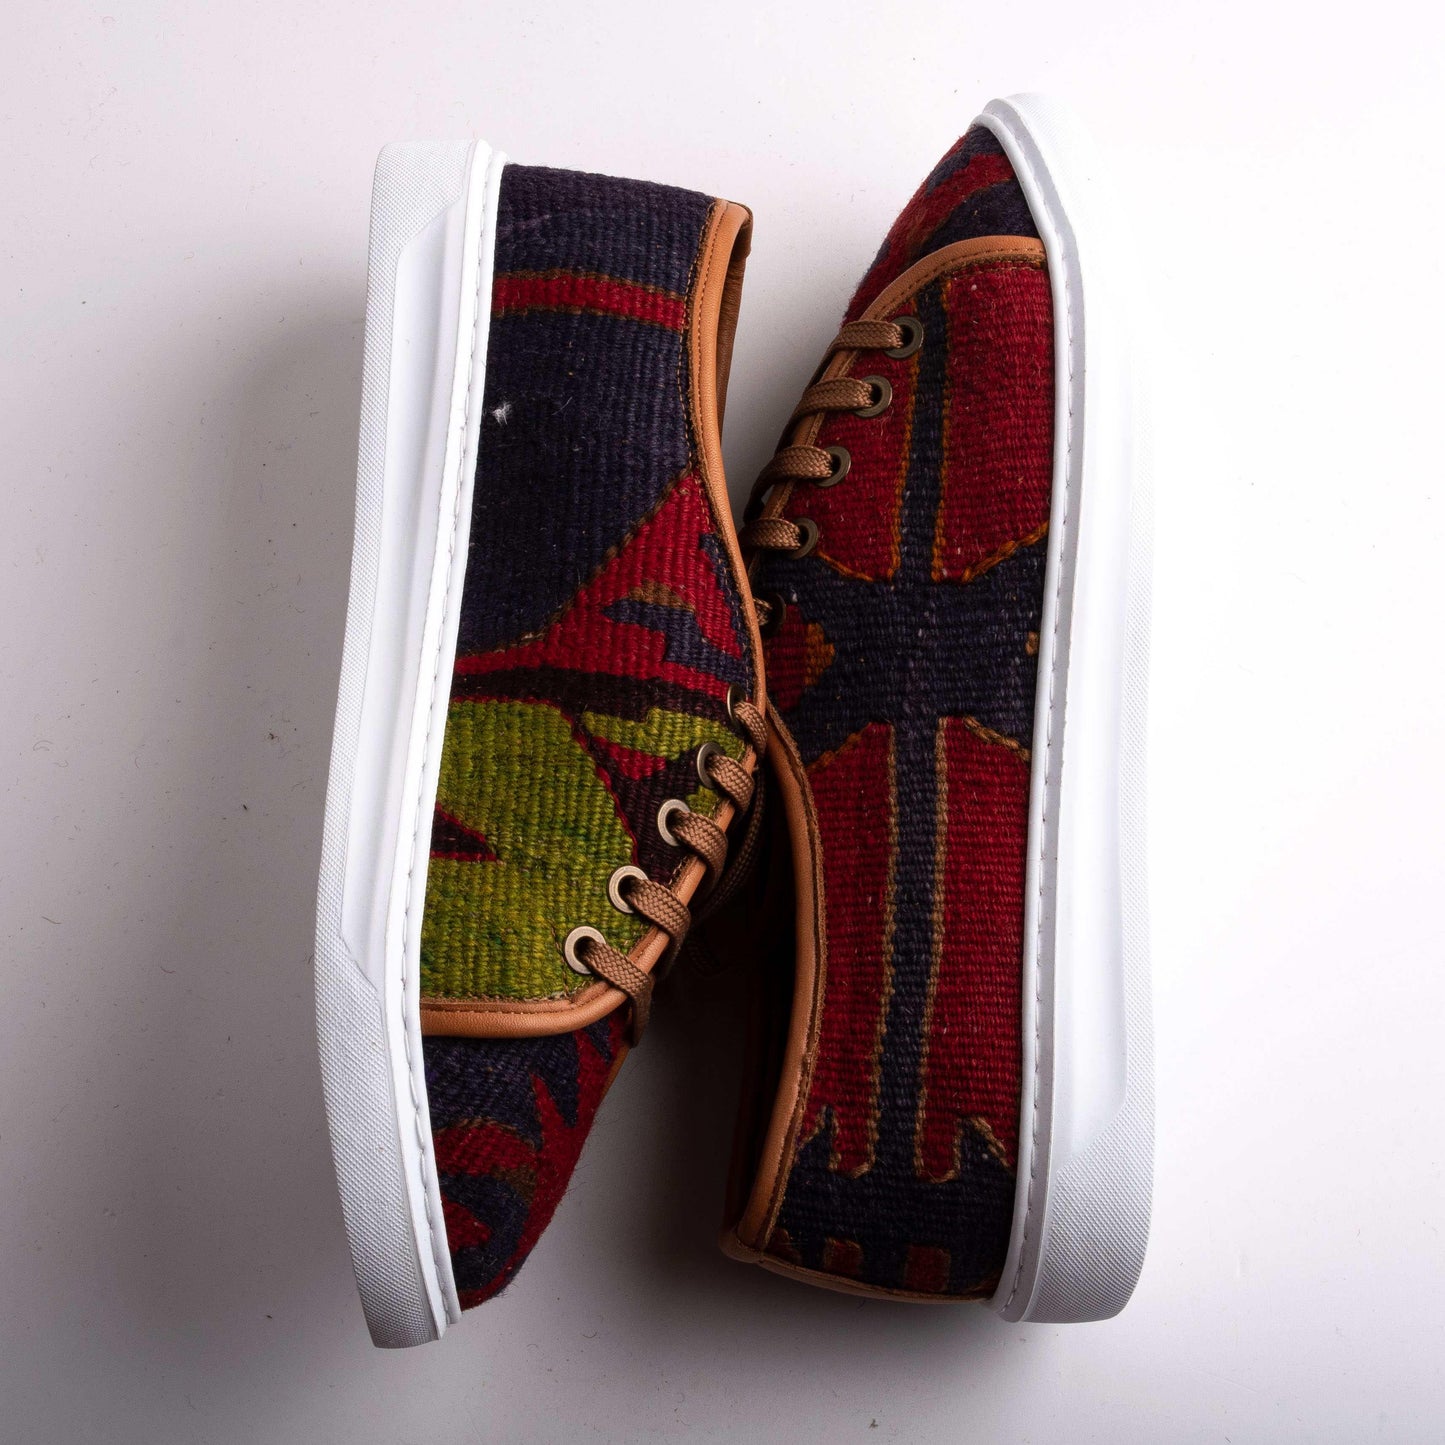 Ethnic Man Slip-On Shoes Crafted From Handmade Kilim and Real Leather Size 10 Base Width: 10 cm - Base Length: 30,5 cm